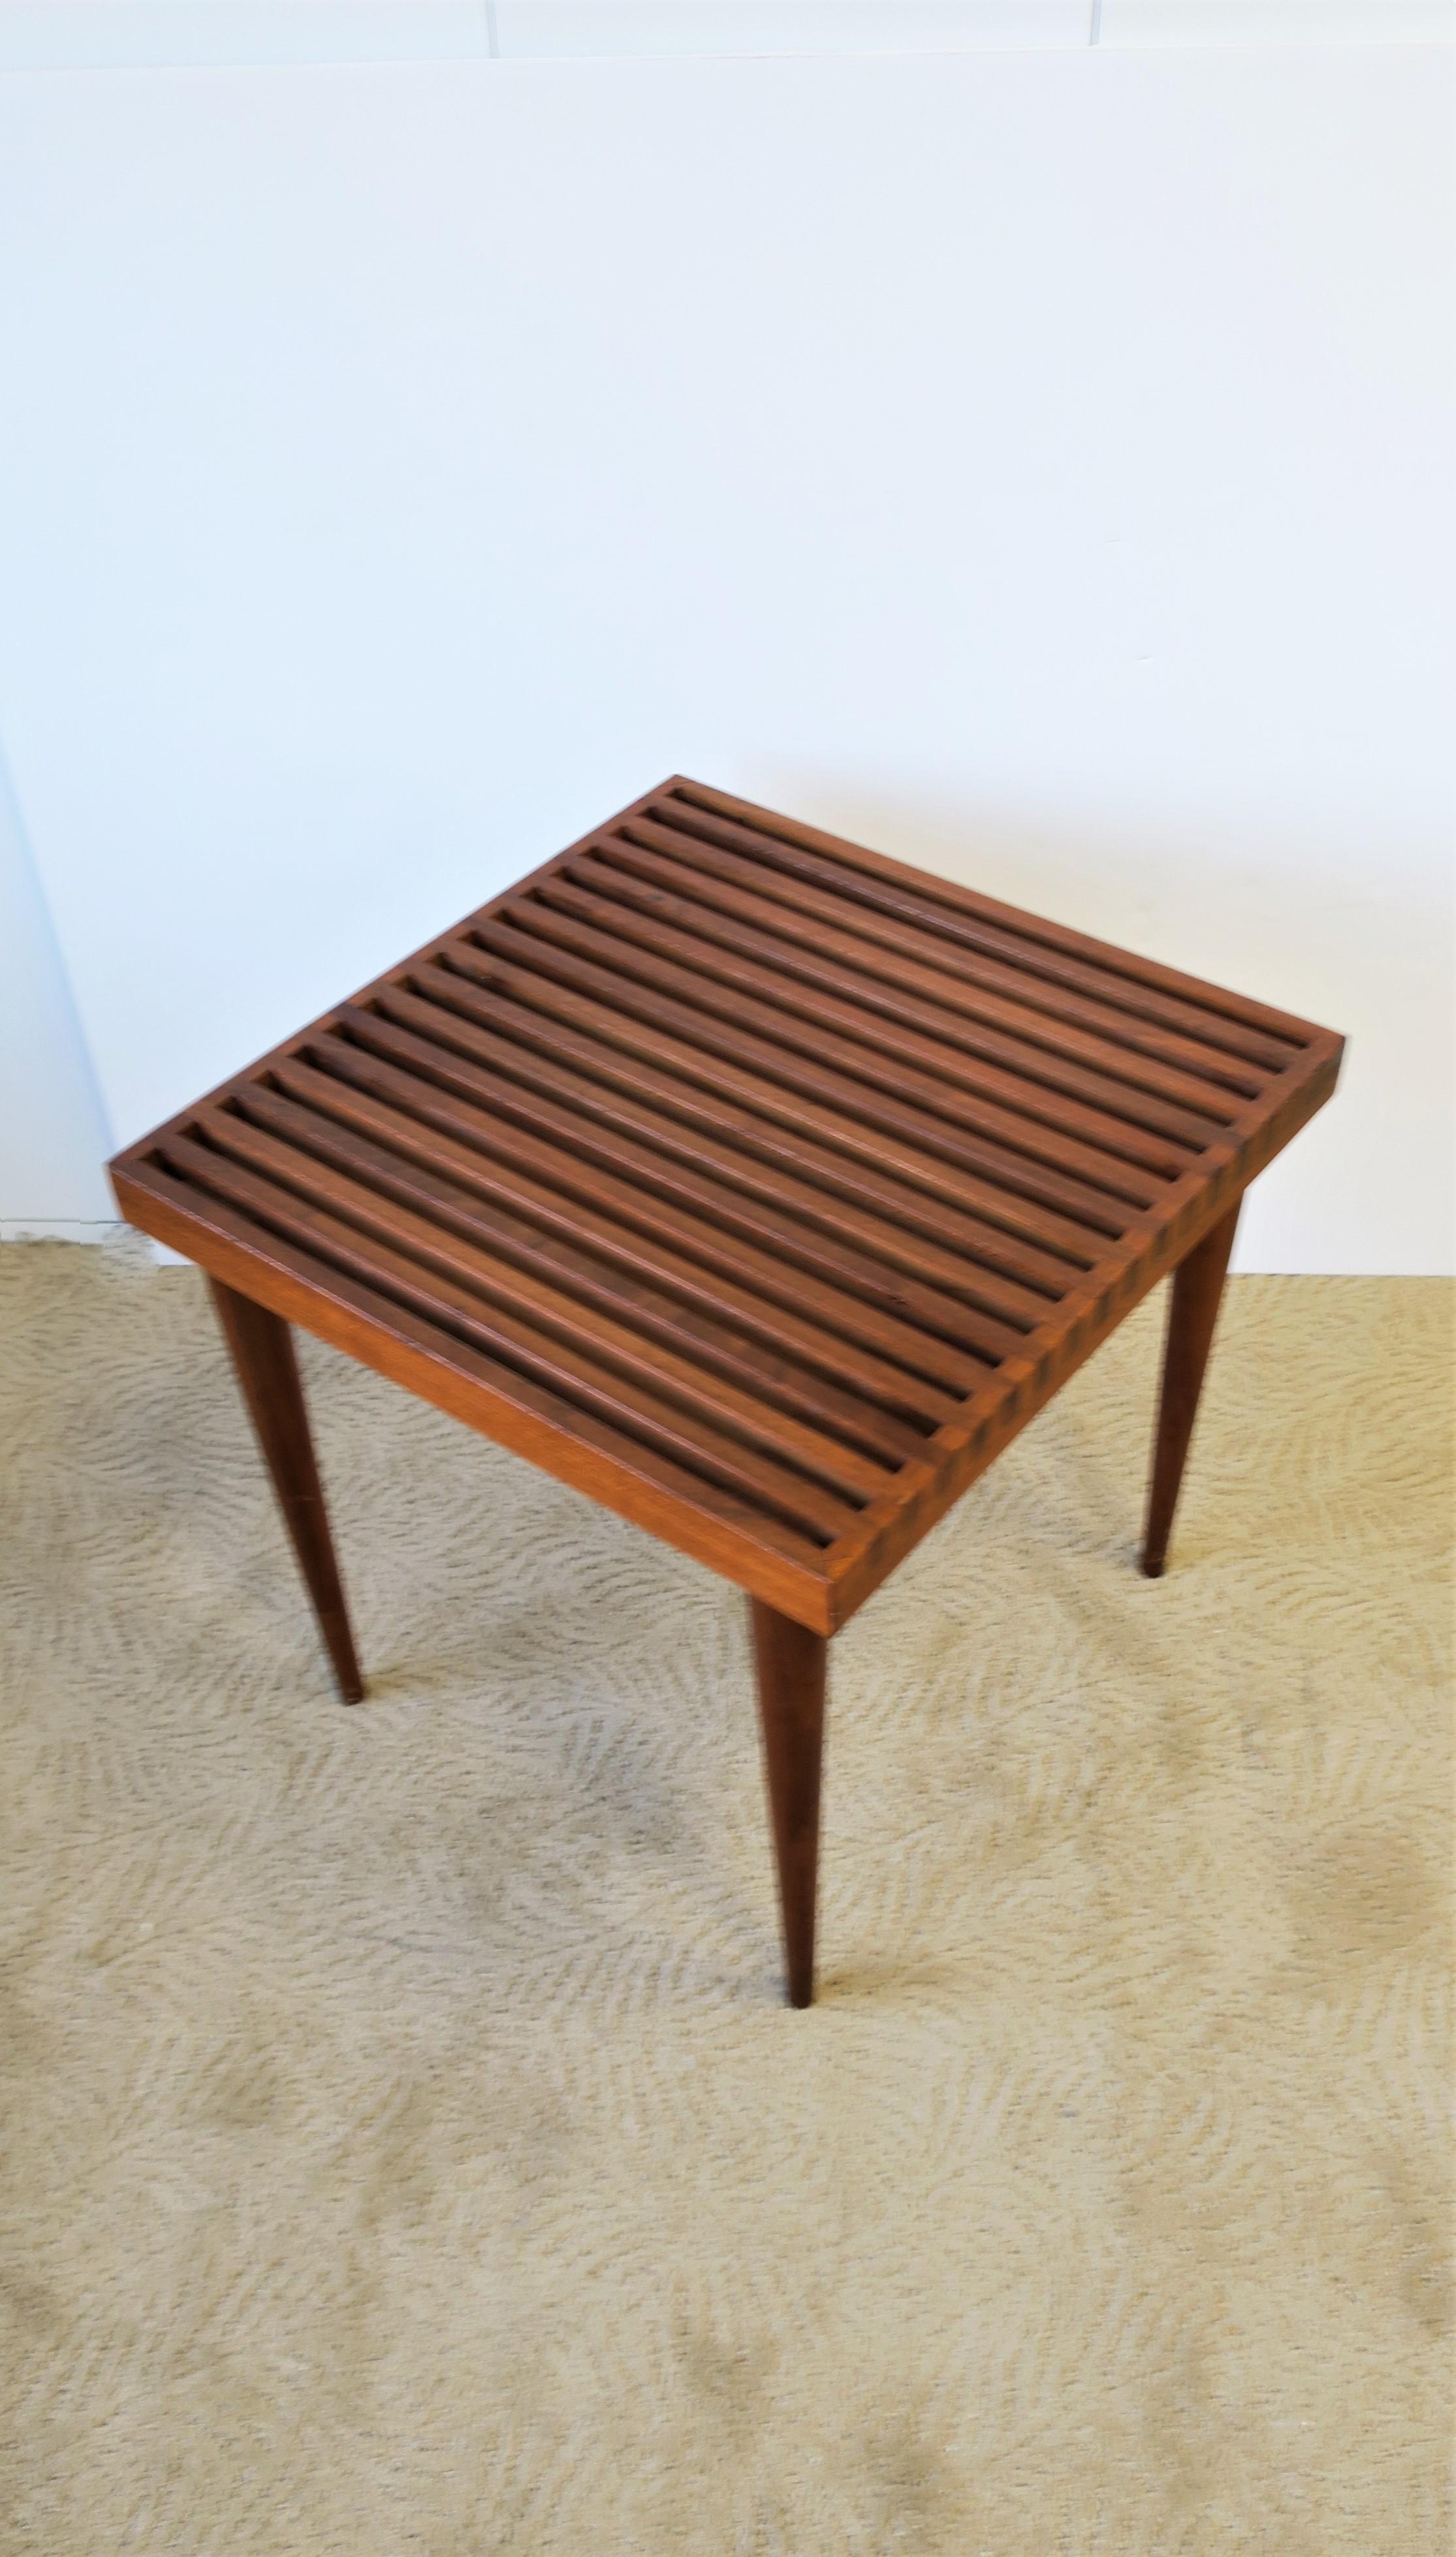 A Mid-Century Modern or Scandinavian Modern style slat wood end / side table attributed to American designer Mel Smilow, circa mid-20th century, USA. Table is well made with quality wood, beautiful details, square in shape with tapered legs.